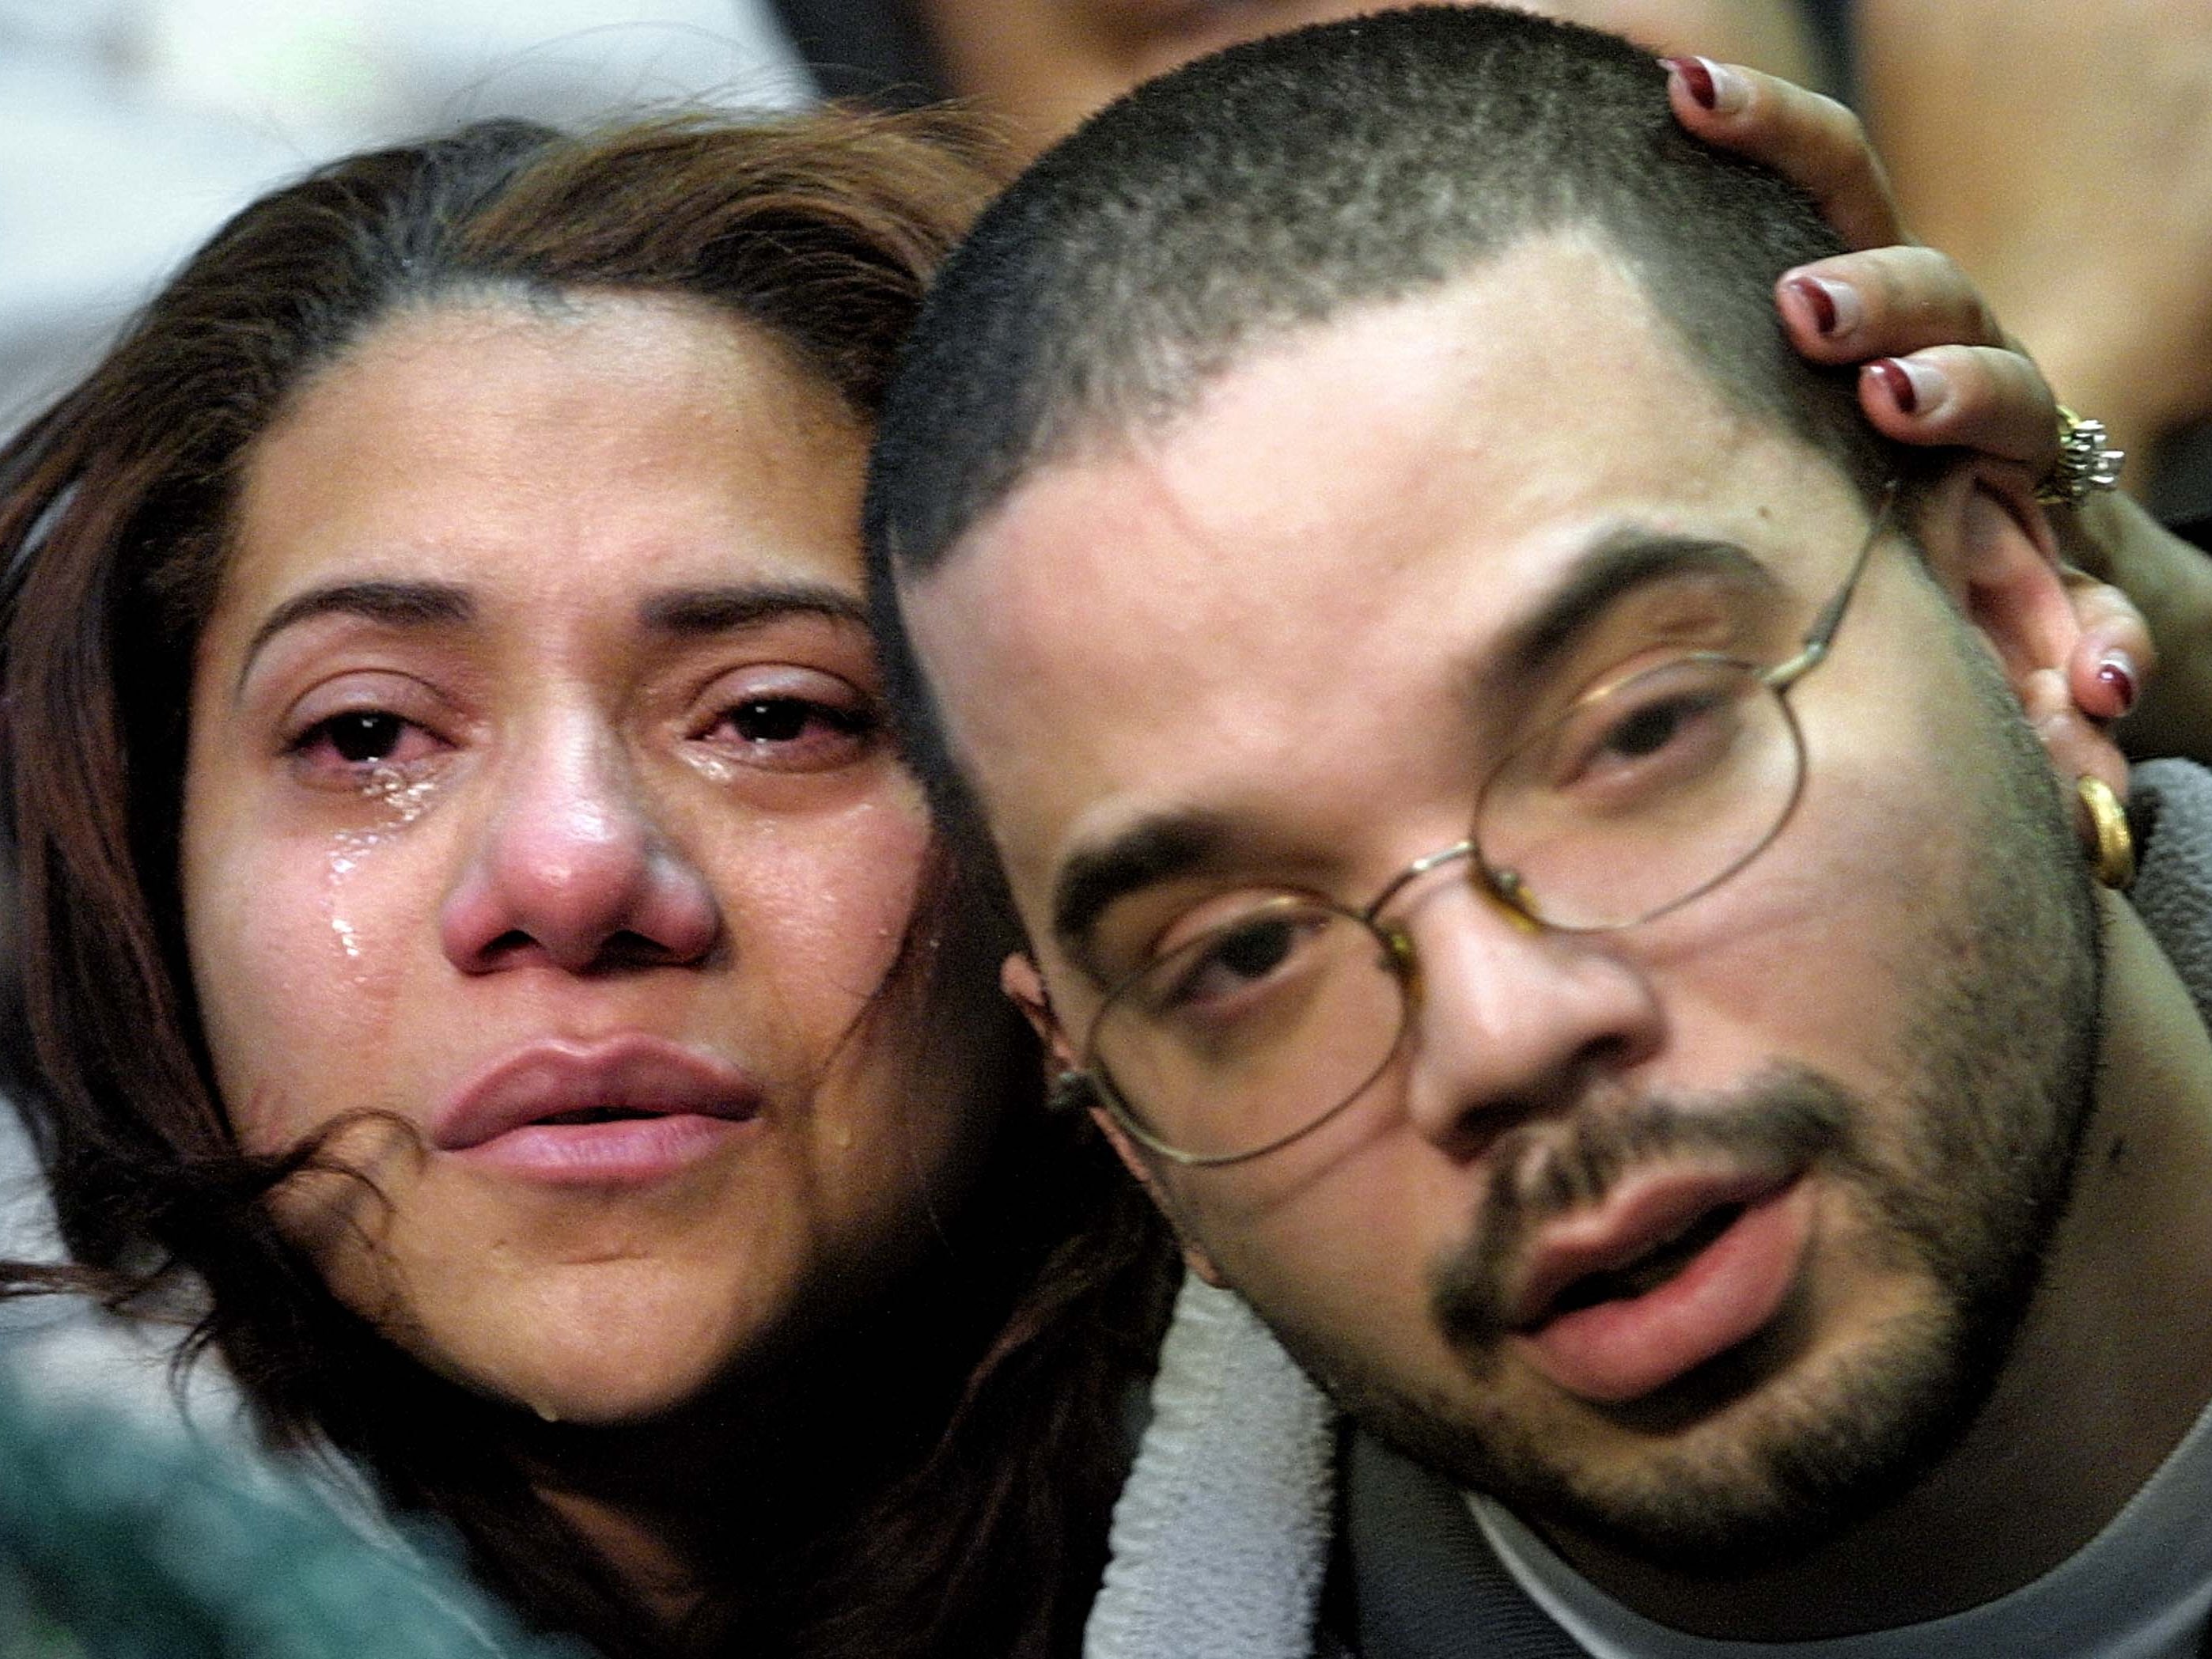 Maxima Nunez and Carlos Morales grieve at a service for family members of the victims of the American Airlines Flight 587 crash on 12 November 2001 in New York City. Morales lost both his parents in the crash